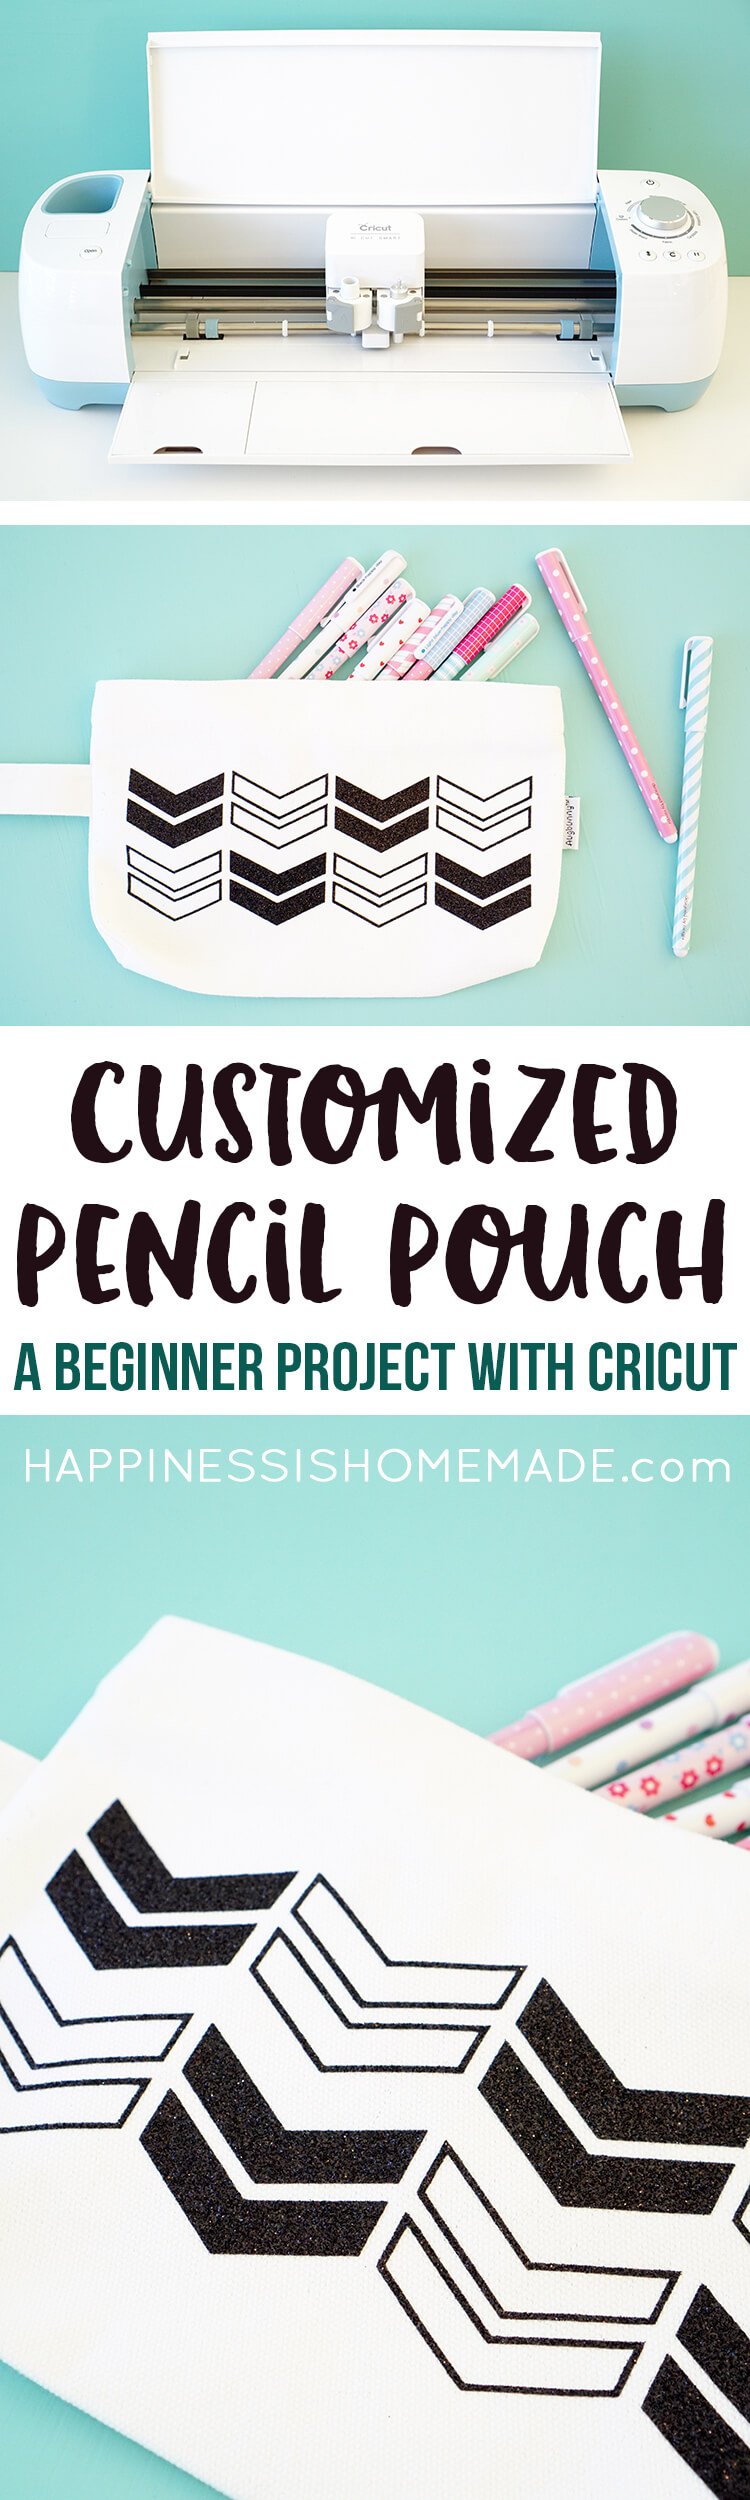 customized pencil pouch a beginner project with cricut